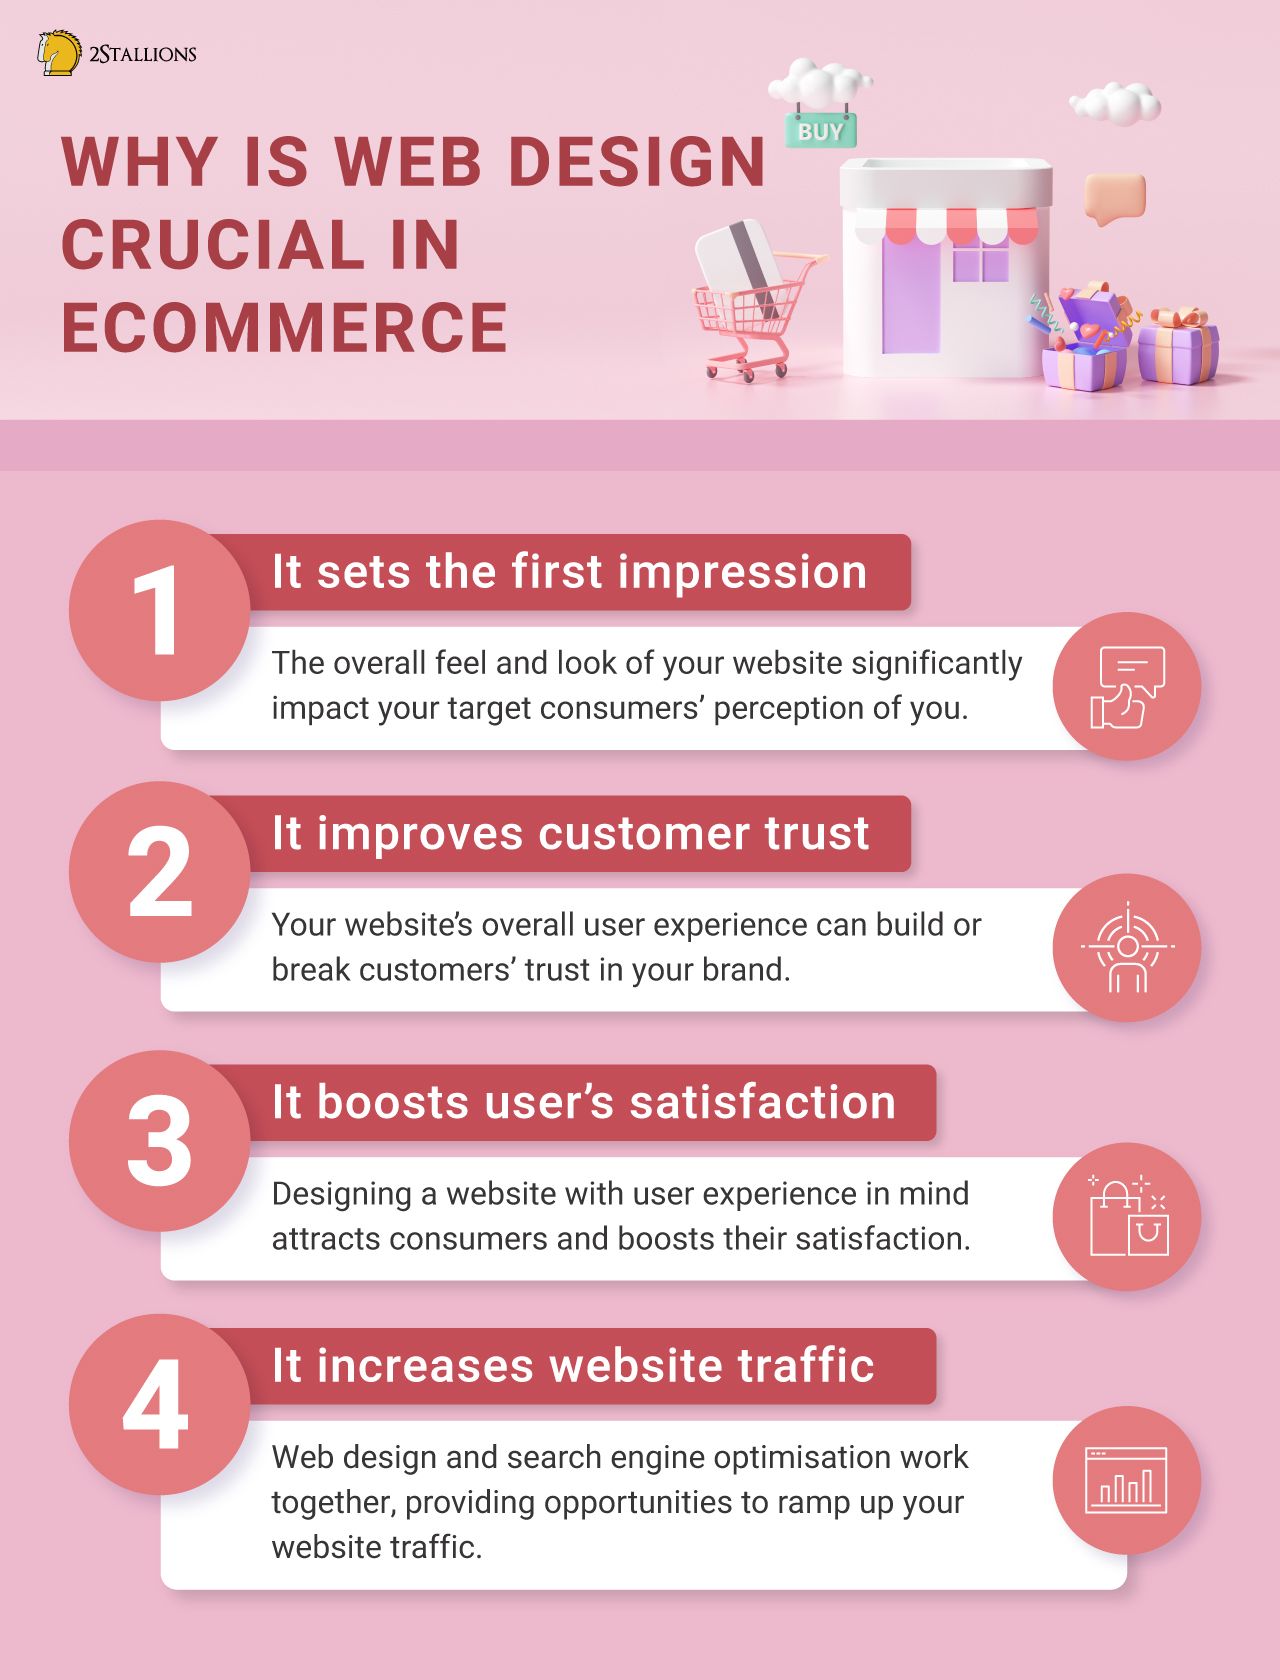 web design in ecommerce, infographic, 